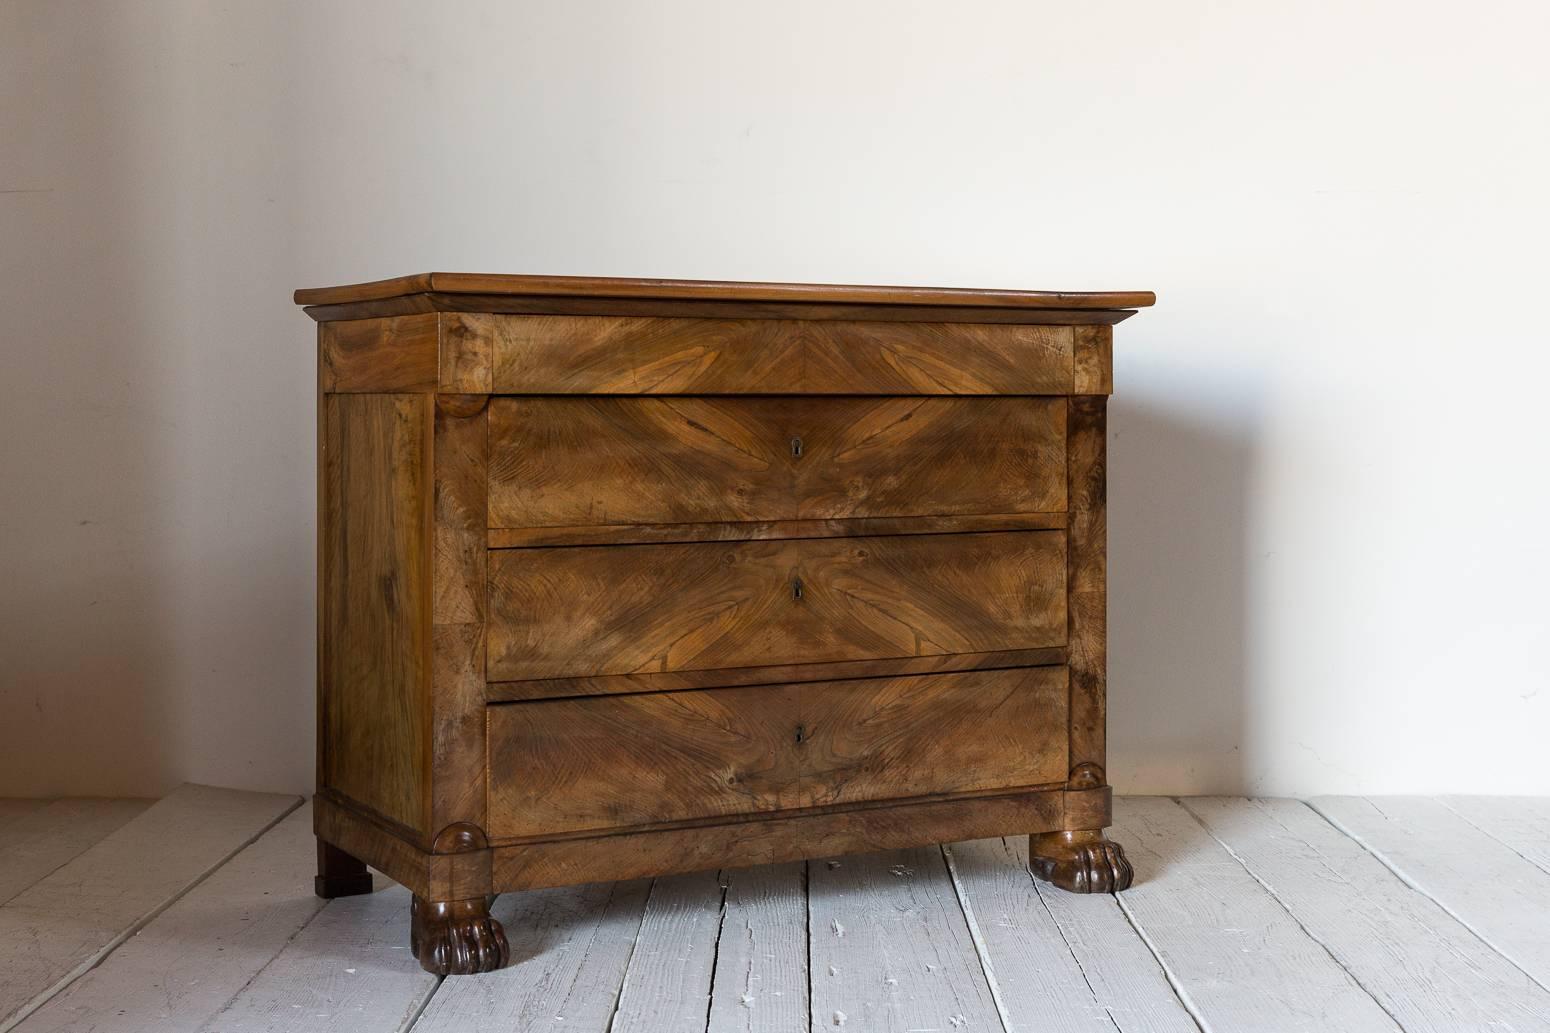 French three-drawer dresser with key hole details framed with beautiful mahogany marquetry details.